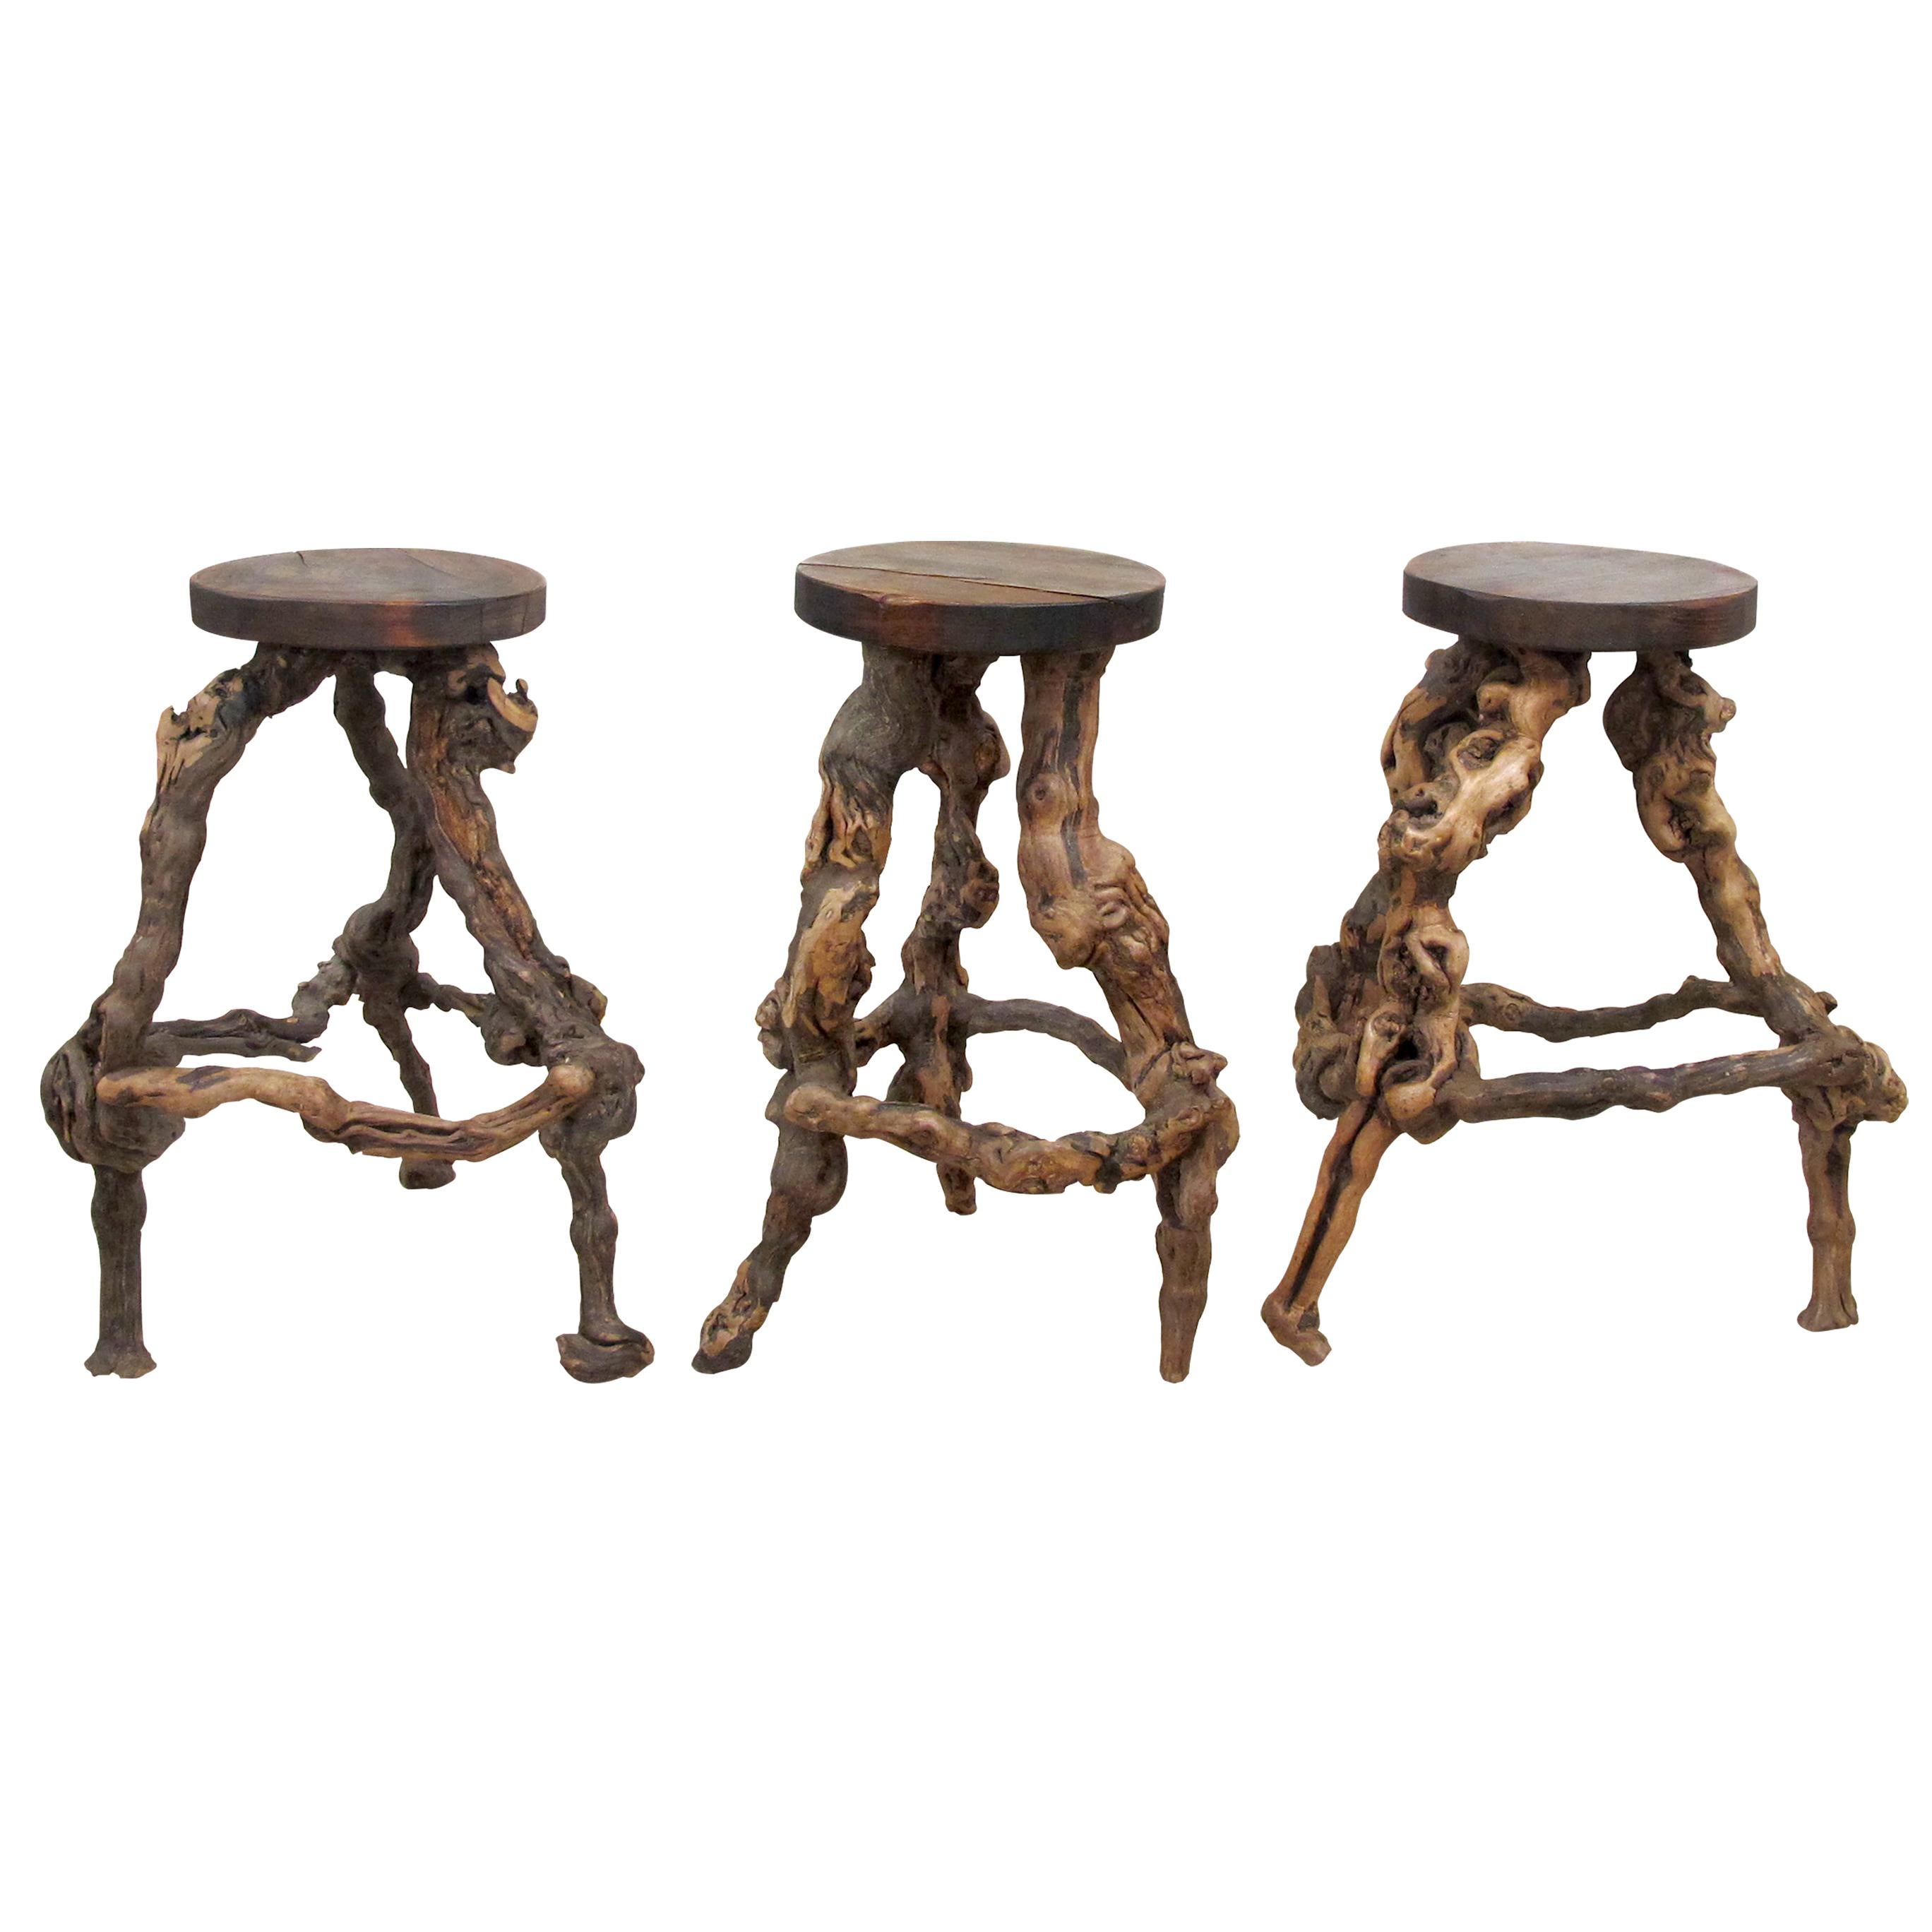 A set of 3 French mid century grapevine bar stools. These unique stools have been handcrafted individually; the base is made of naturally twisted vine roots; therefore, each stool is unique. The stools have acquired a nice patina commensurate with